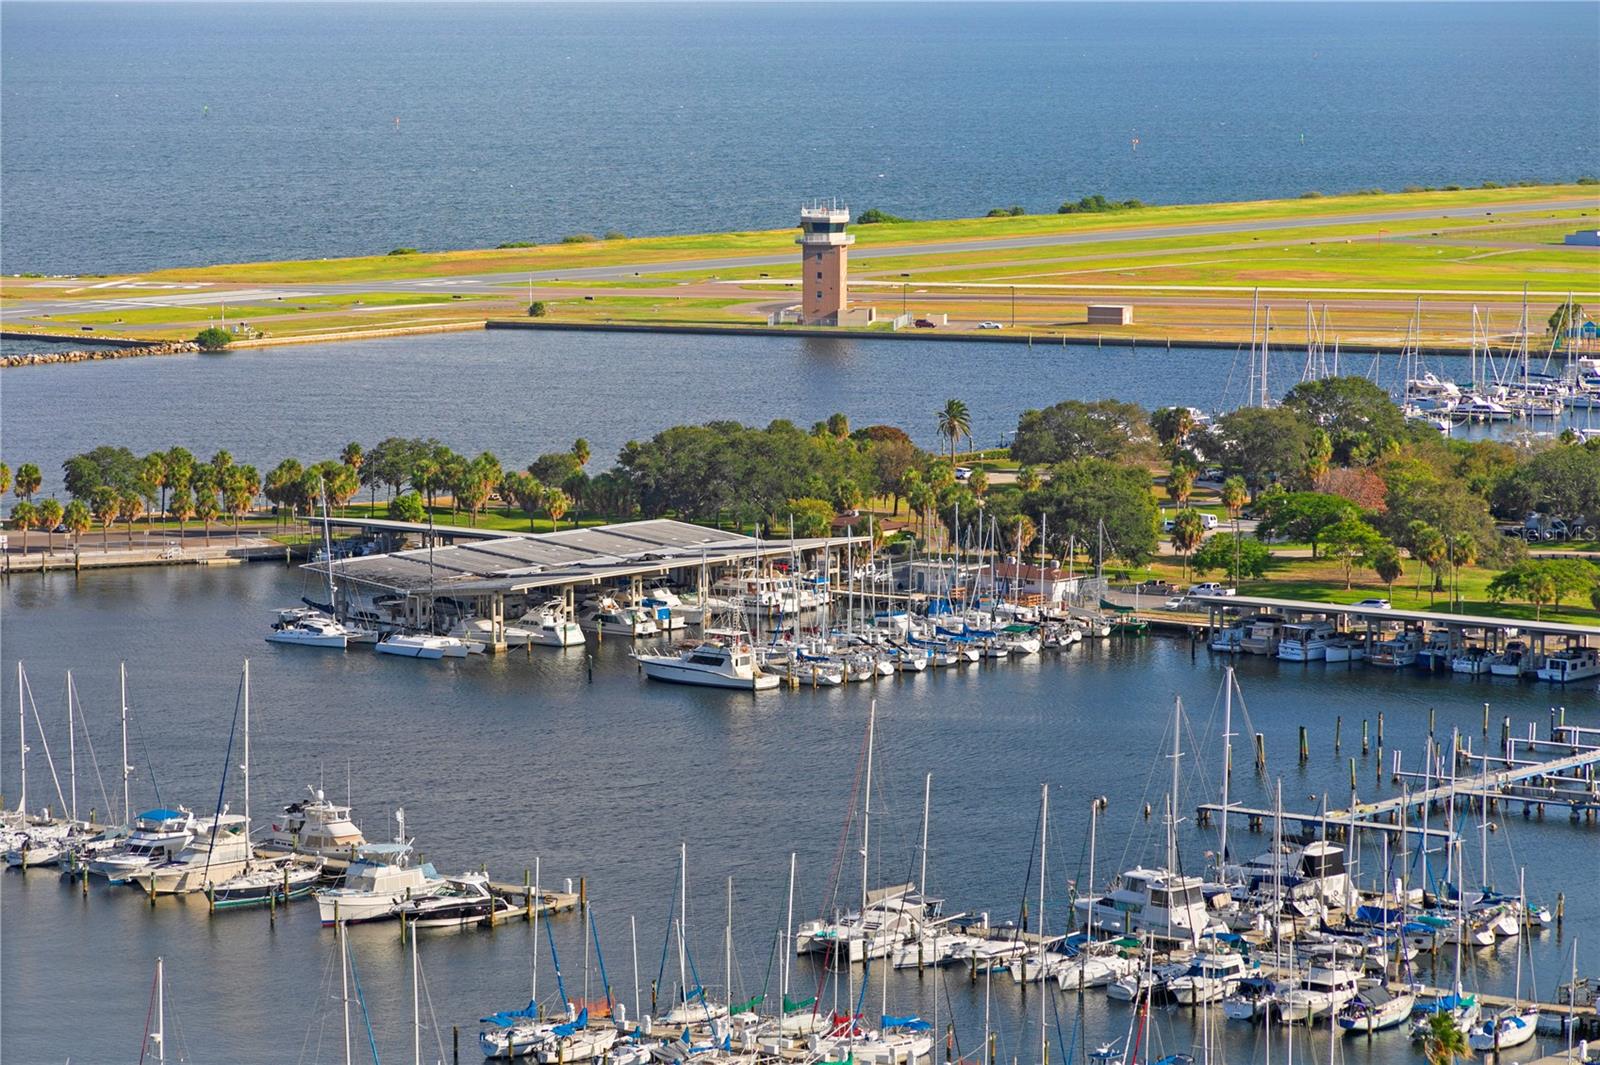 Close up view of the marina and the airport